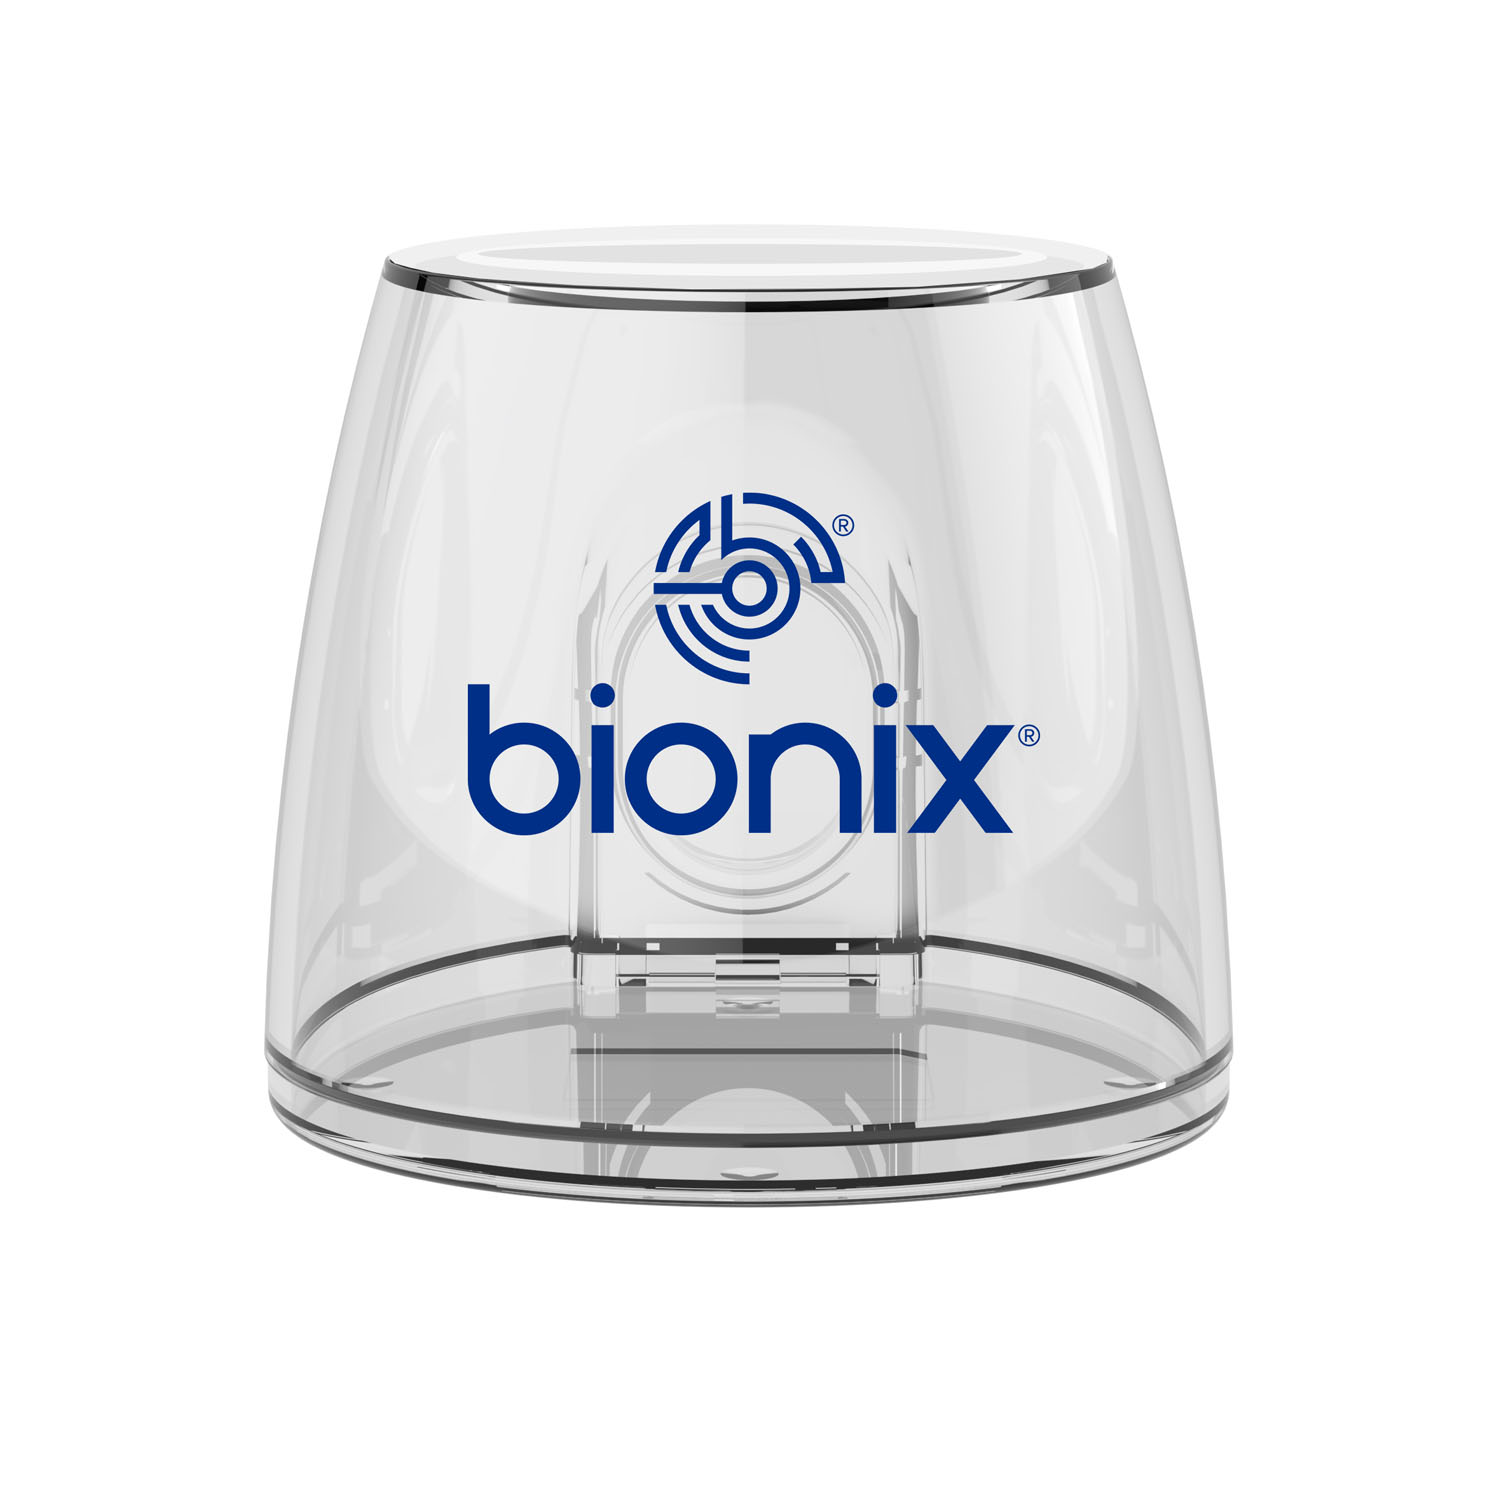 BIONIX EAR IRRIGATION ACCESSORIES AND SUPPLIES : 7283 EA $18.08 Stocked